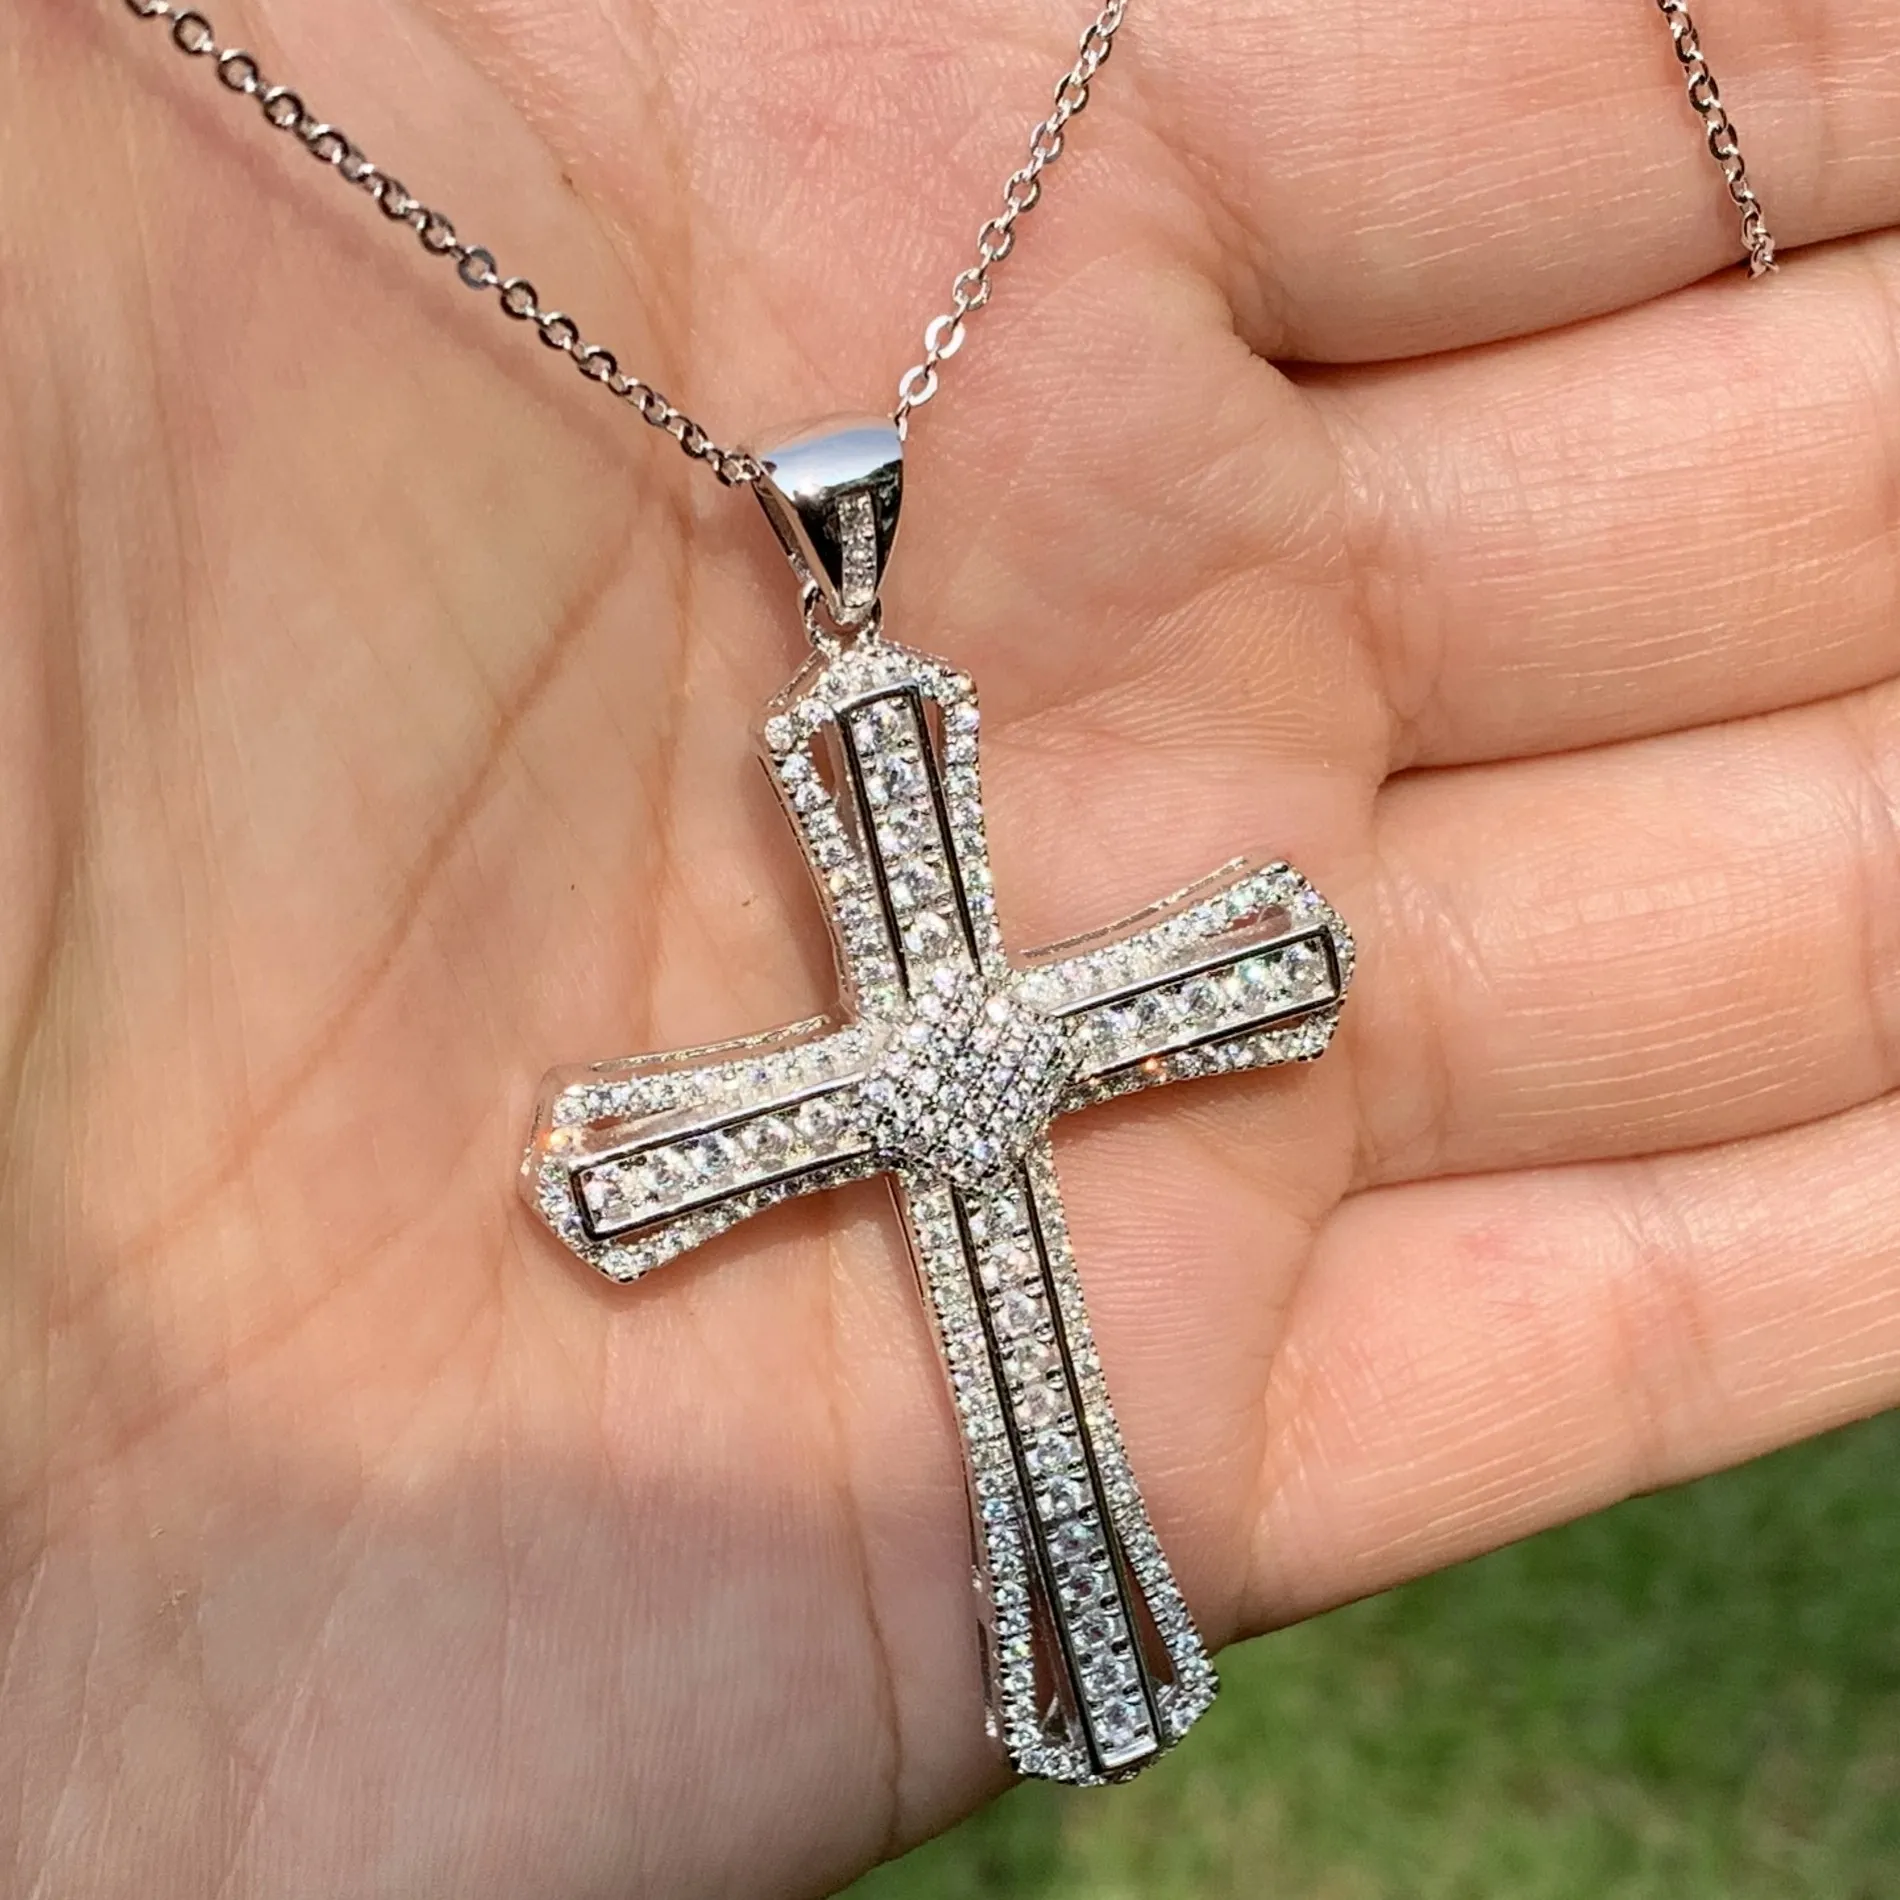 Choucong Brand New Unique Luxury Jewelry Cross Pendant 925 Sterling Silver Pave White Clear 5A Cubic Zirconia CZ Women NecklaceWi228s